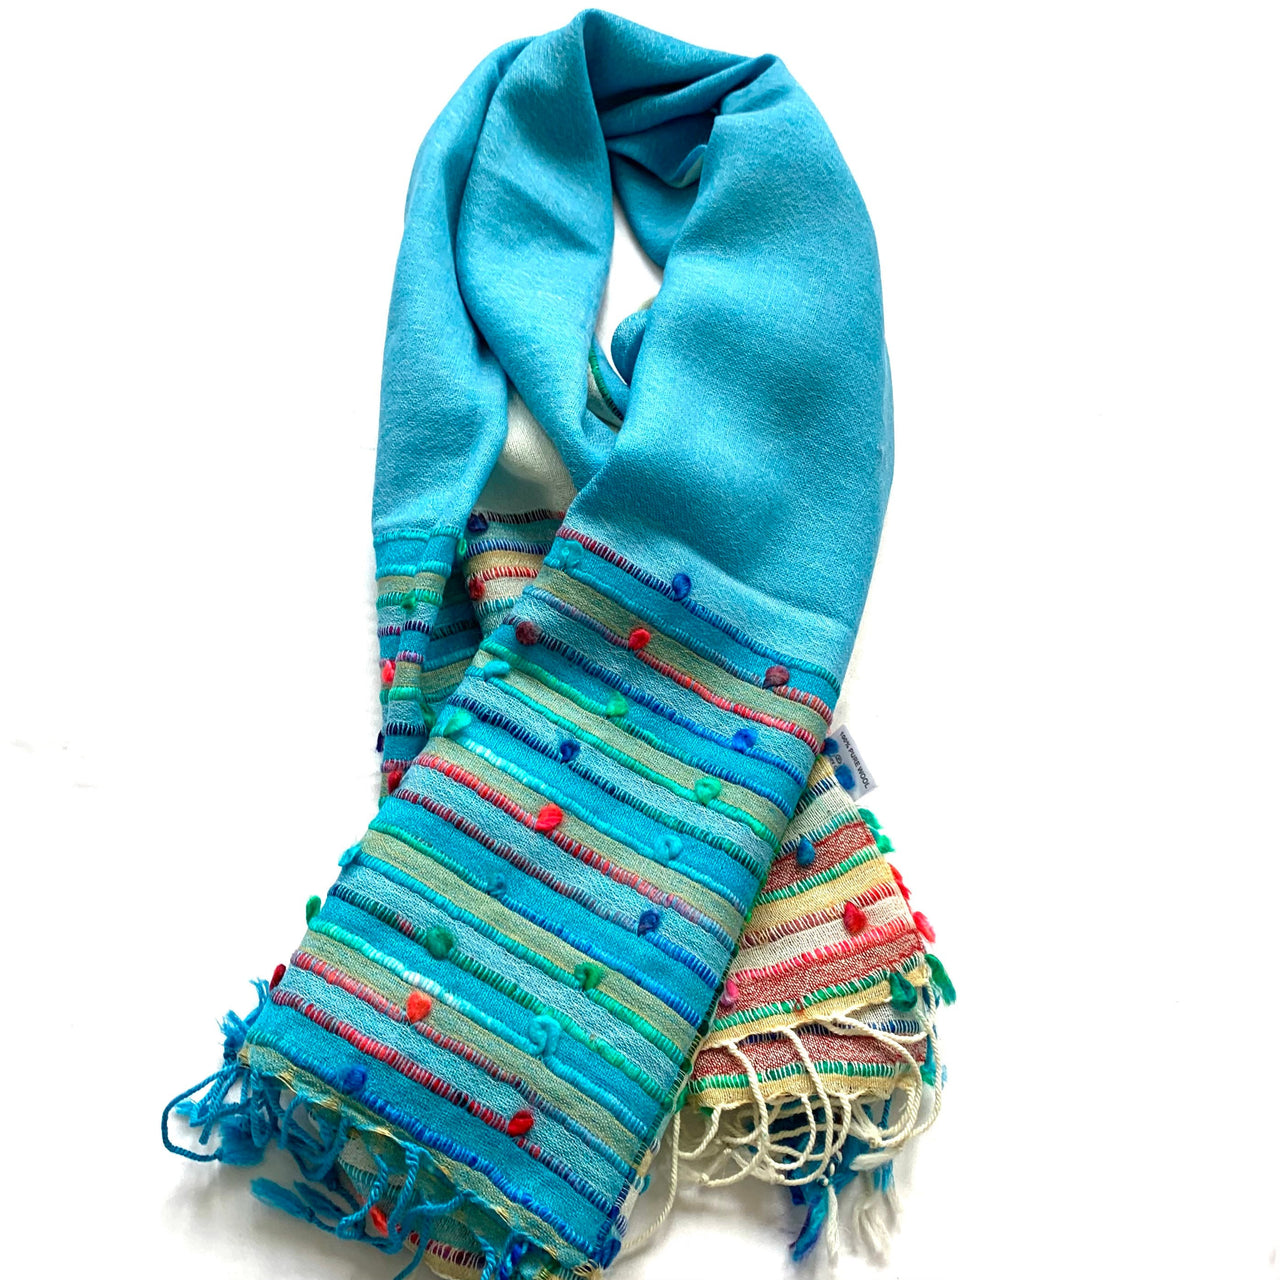 Turquoise Cream Hand-Knotted wool Pashmina Multicoloured Scarf Shawl Wrap Stole